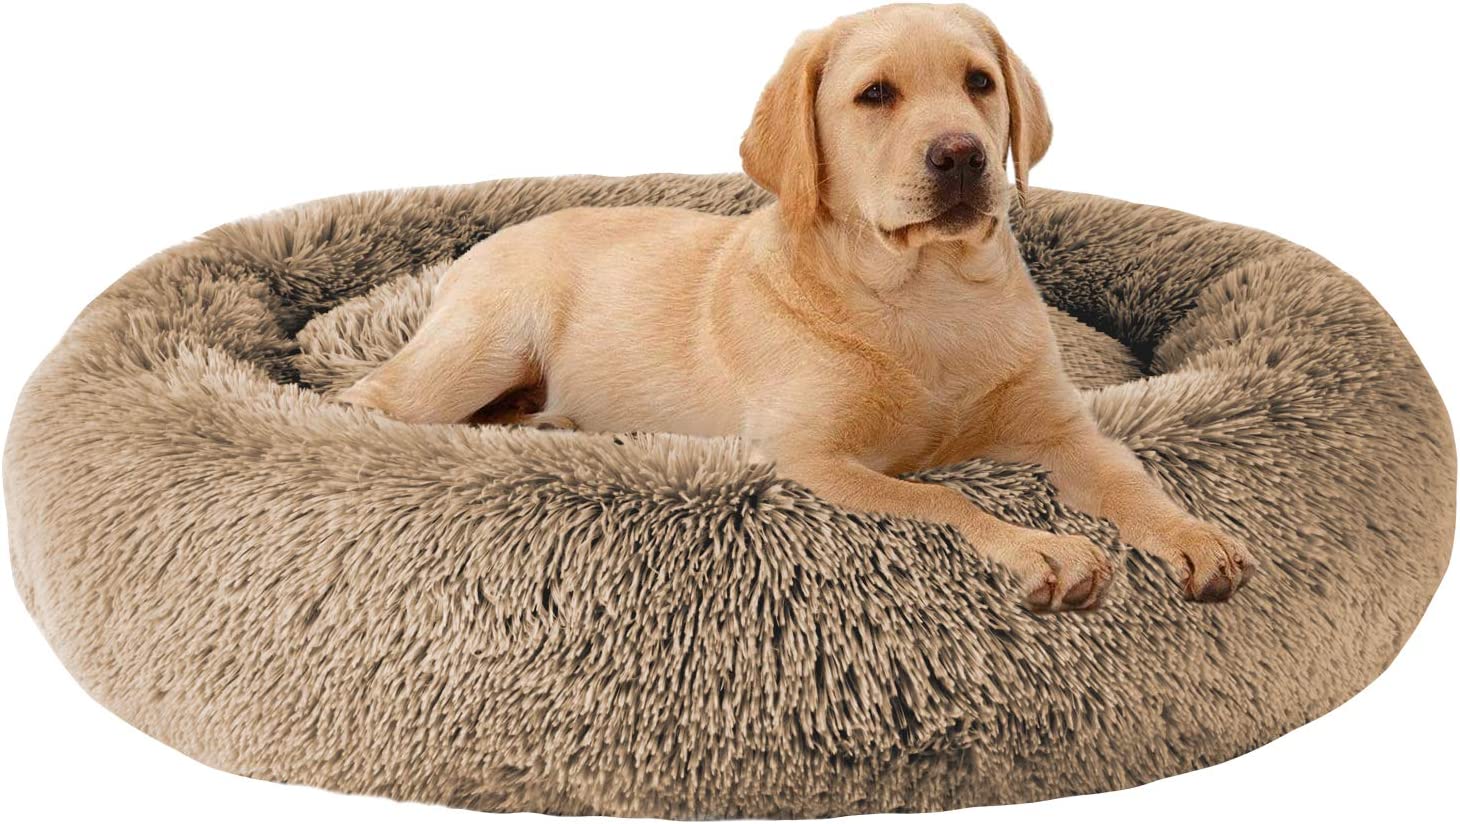 MFOX Calming Dog Bed Review